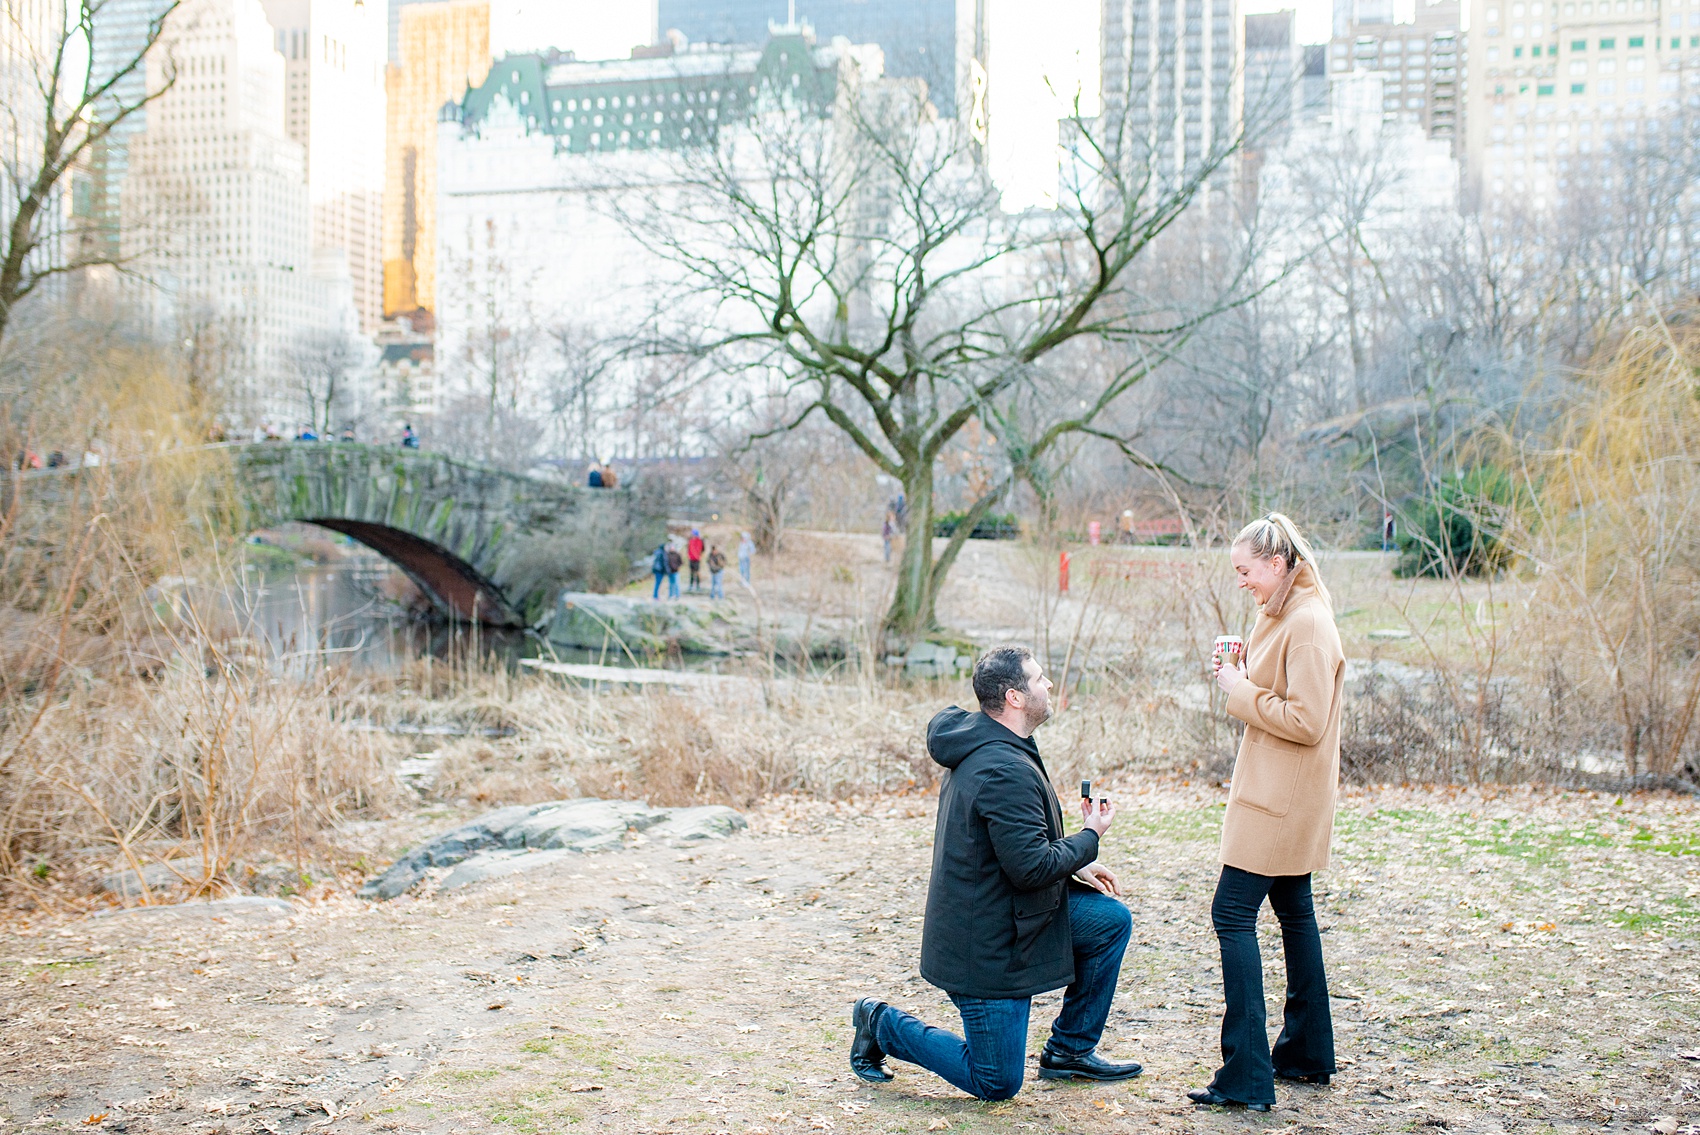 NYC proposal ideas in Central Park with photography by New York City marriage proposal photographer, Mikkel Paige Photography. Of all the cities in the world so many people dream of getting engaged in iconic, beautiful NY. Manhattan is wonderful whether winter, spring, summer, or fall and we're seasoned pros at capturing your moment. Christmas time is magic, Valentine's Day romantic and everyday between can be made memorable! Click through for more grand ideas! #MikkelPaige #NYCproposal #marryme